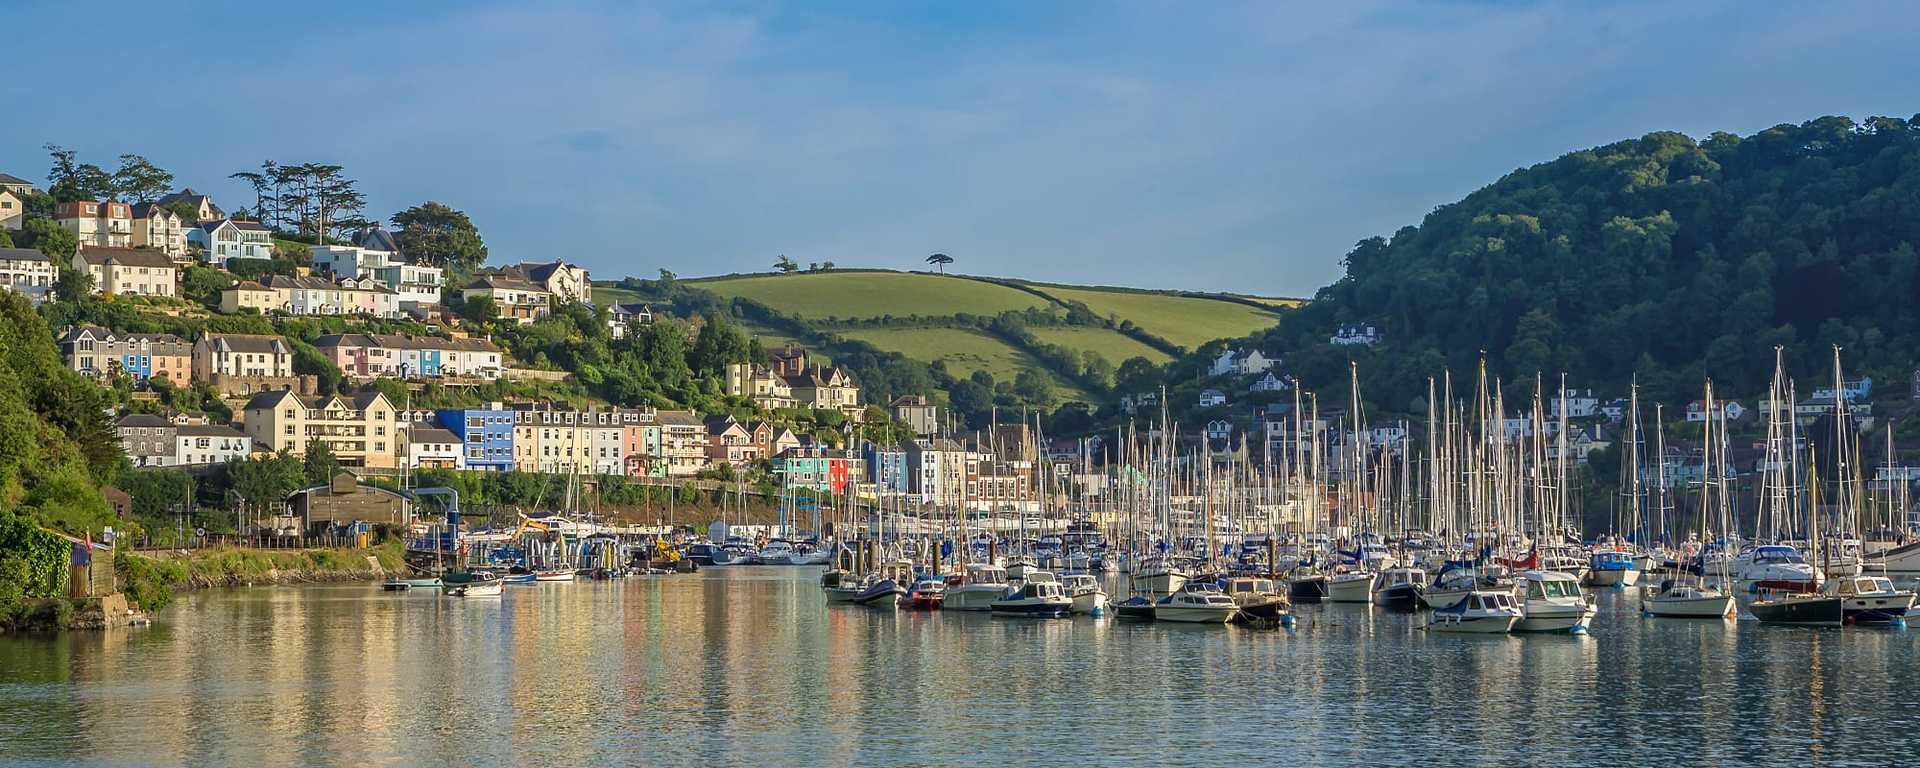 Kingswear village on the hillside and harbor with boats on the banks of the River Dart in the South Hams area Devon, England